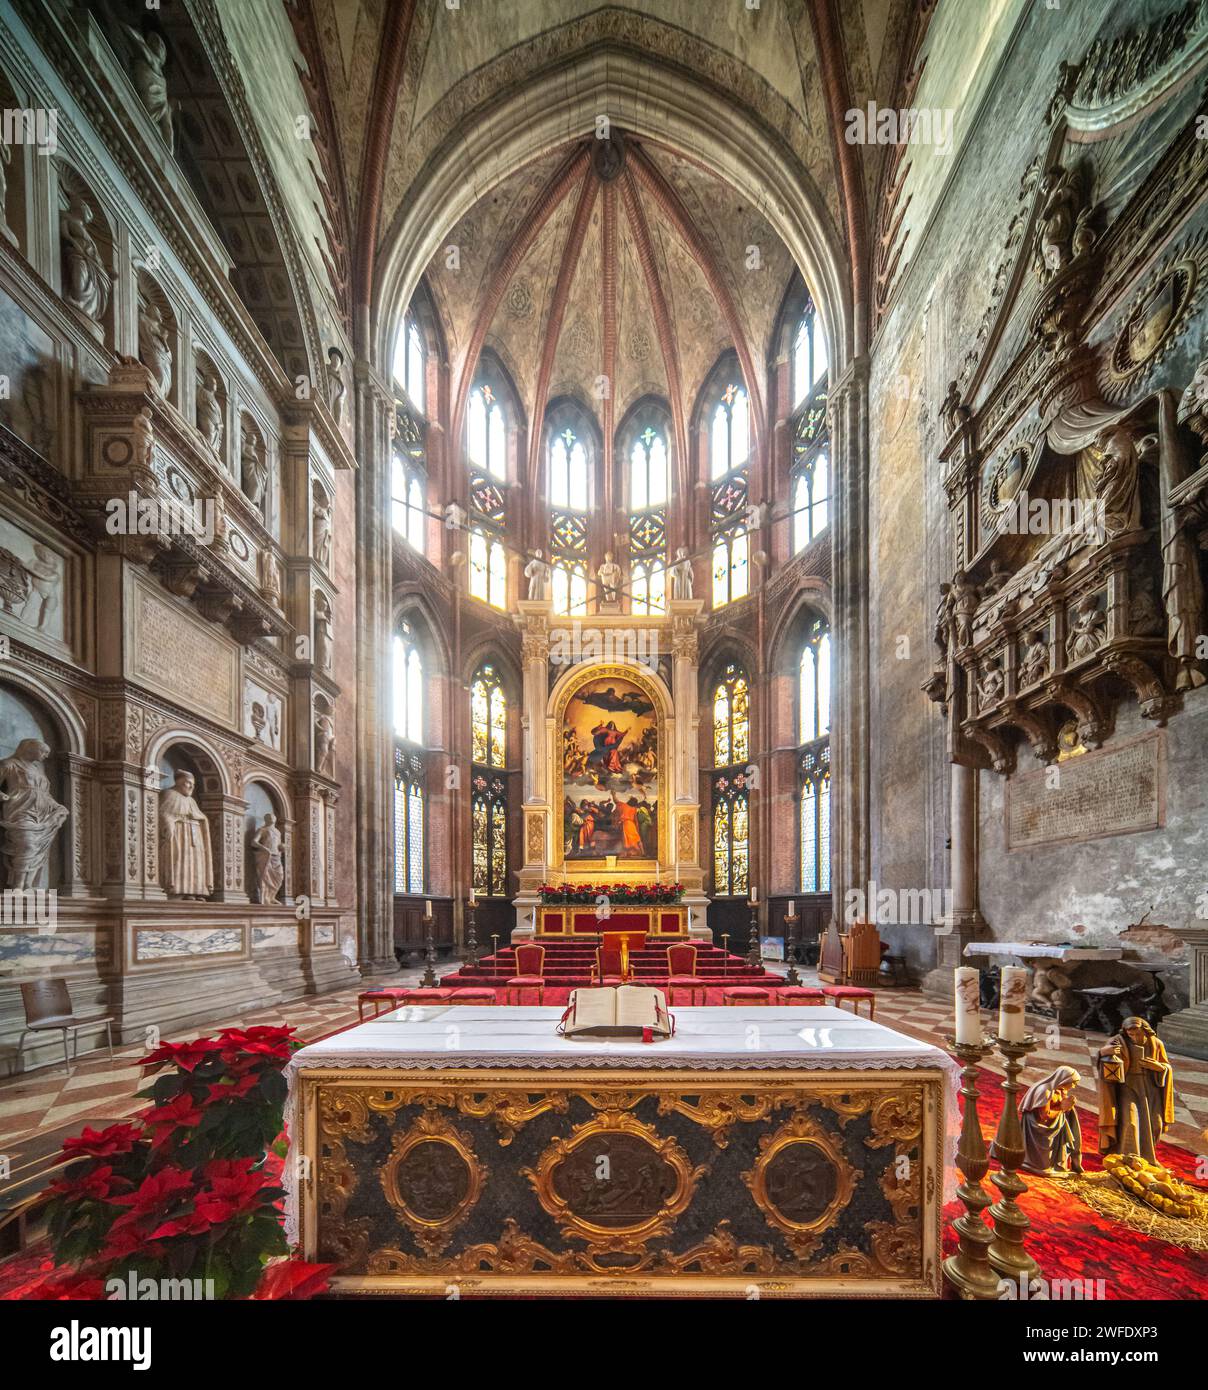 Majestic High Altar of Santa Maria dei Frari Church, Venice, with a large painting by Tiziano Stock Photo